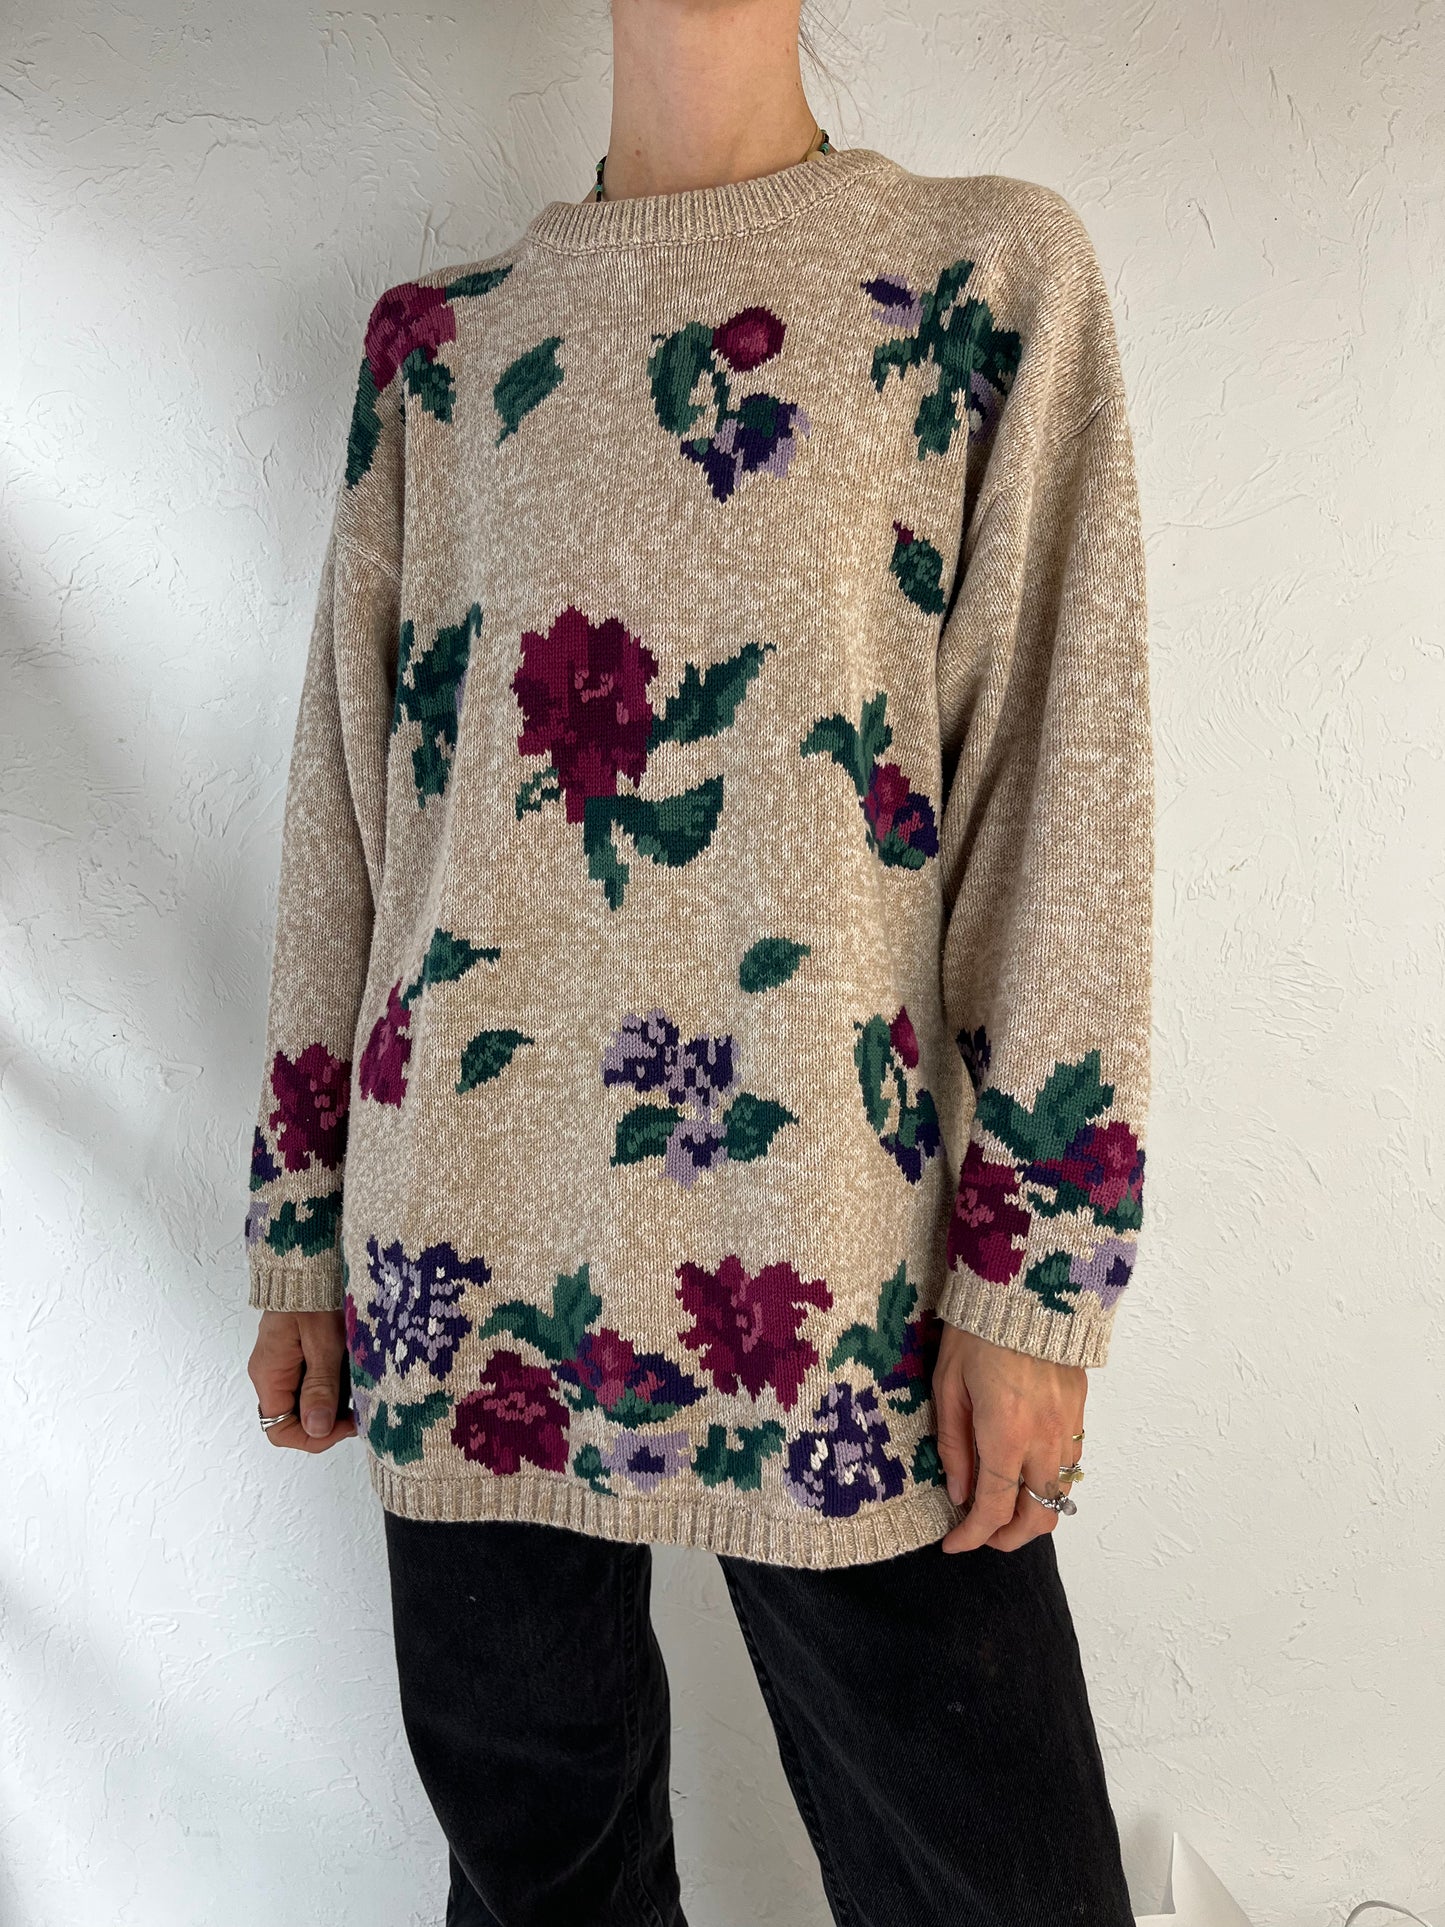 90s 'Northern Reflections' Floral Cotton Knit Sweater / Large